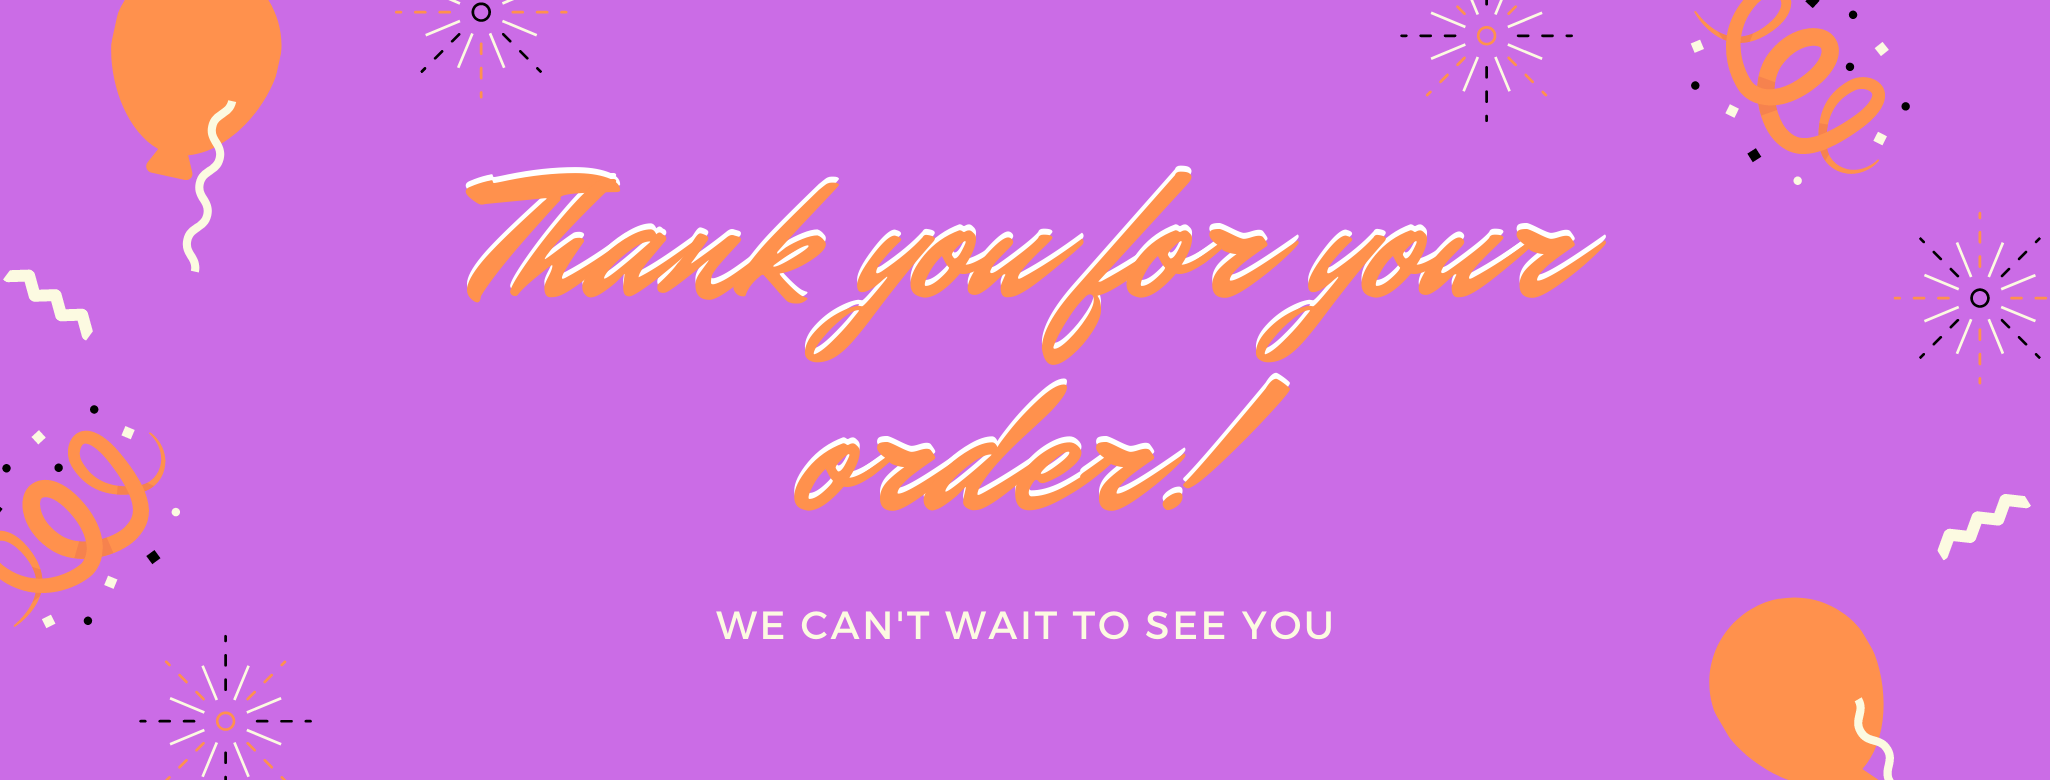 Thank you for your order!